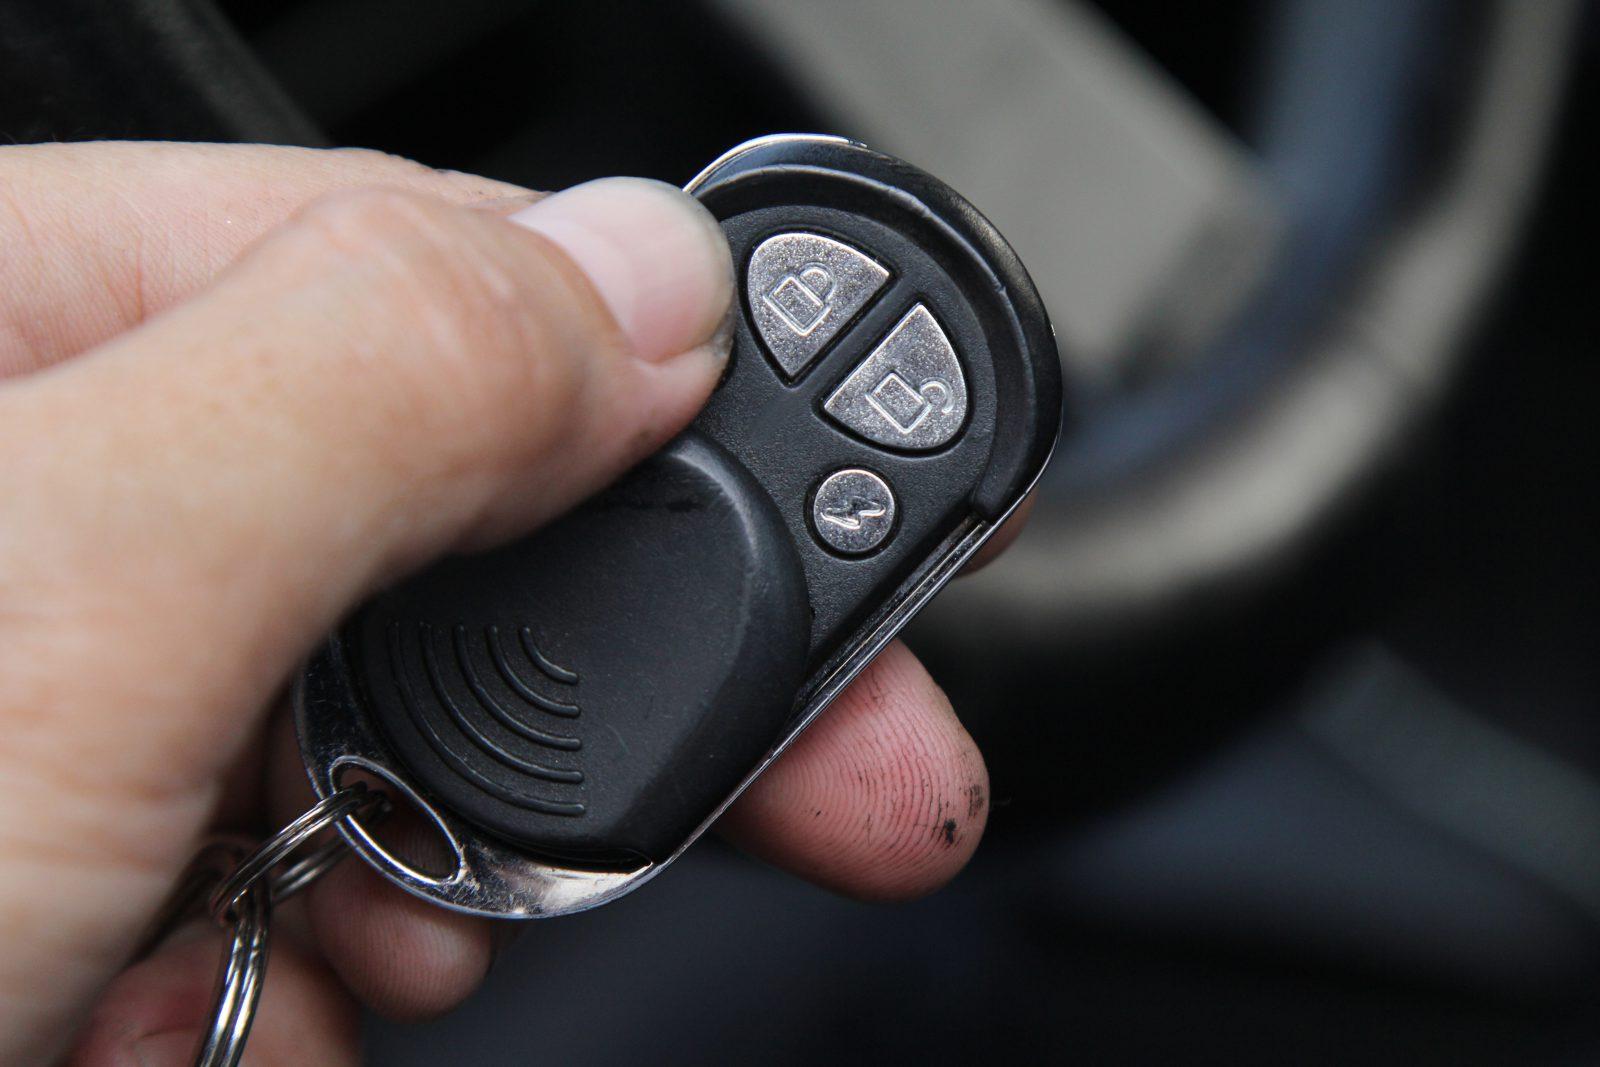 How To Disable Car Alarm Systems